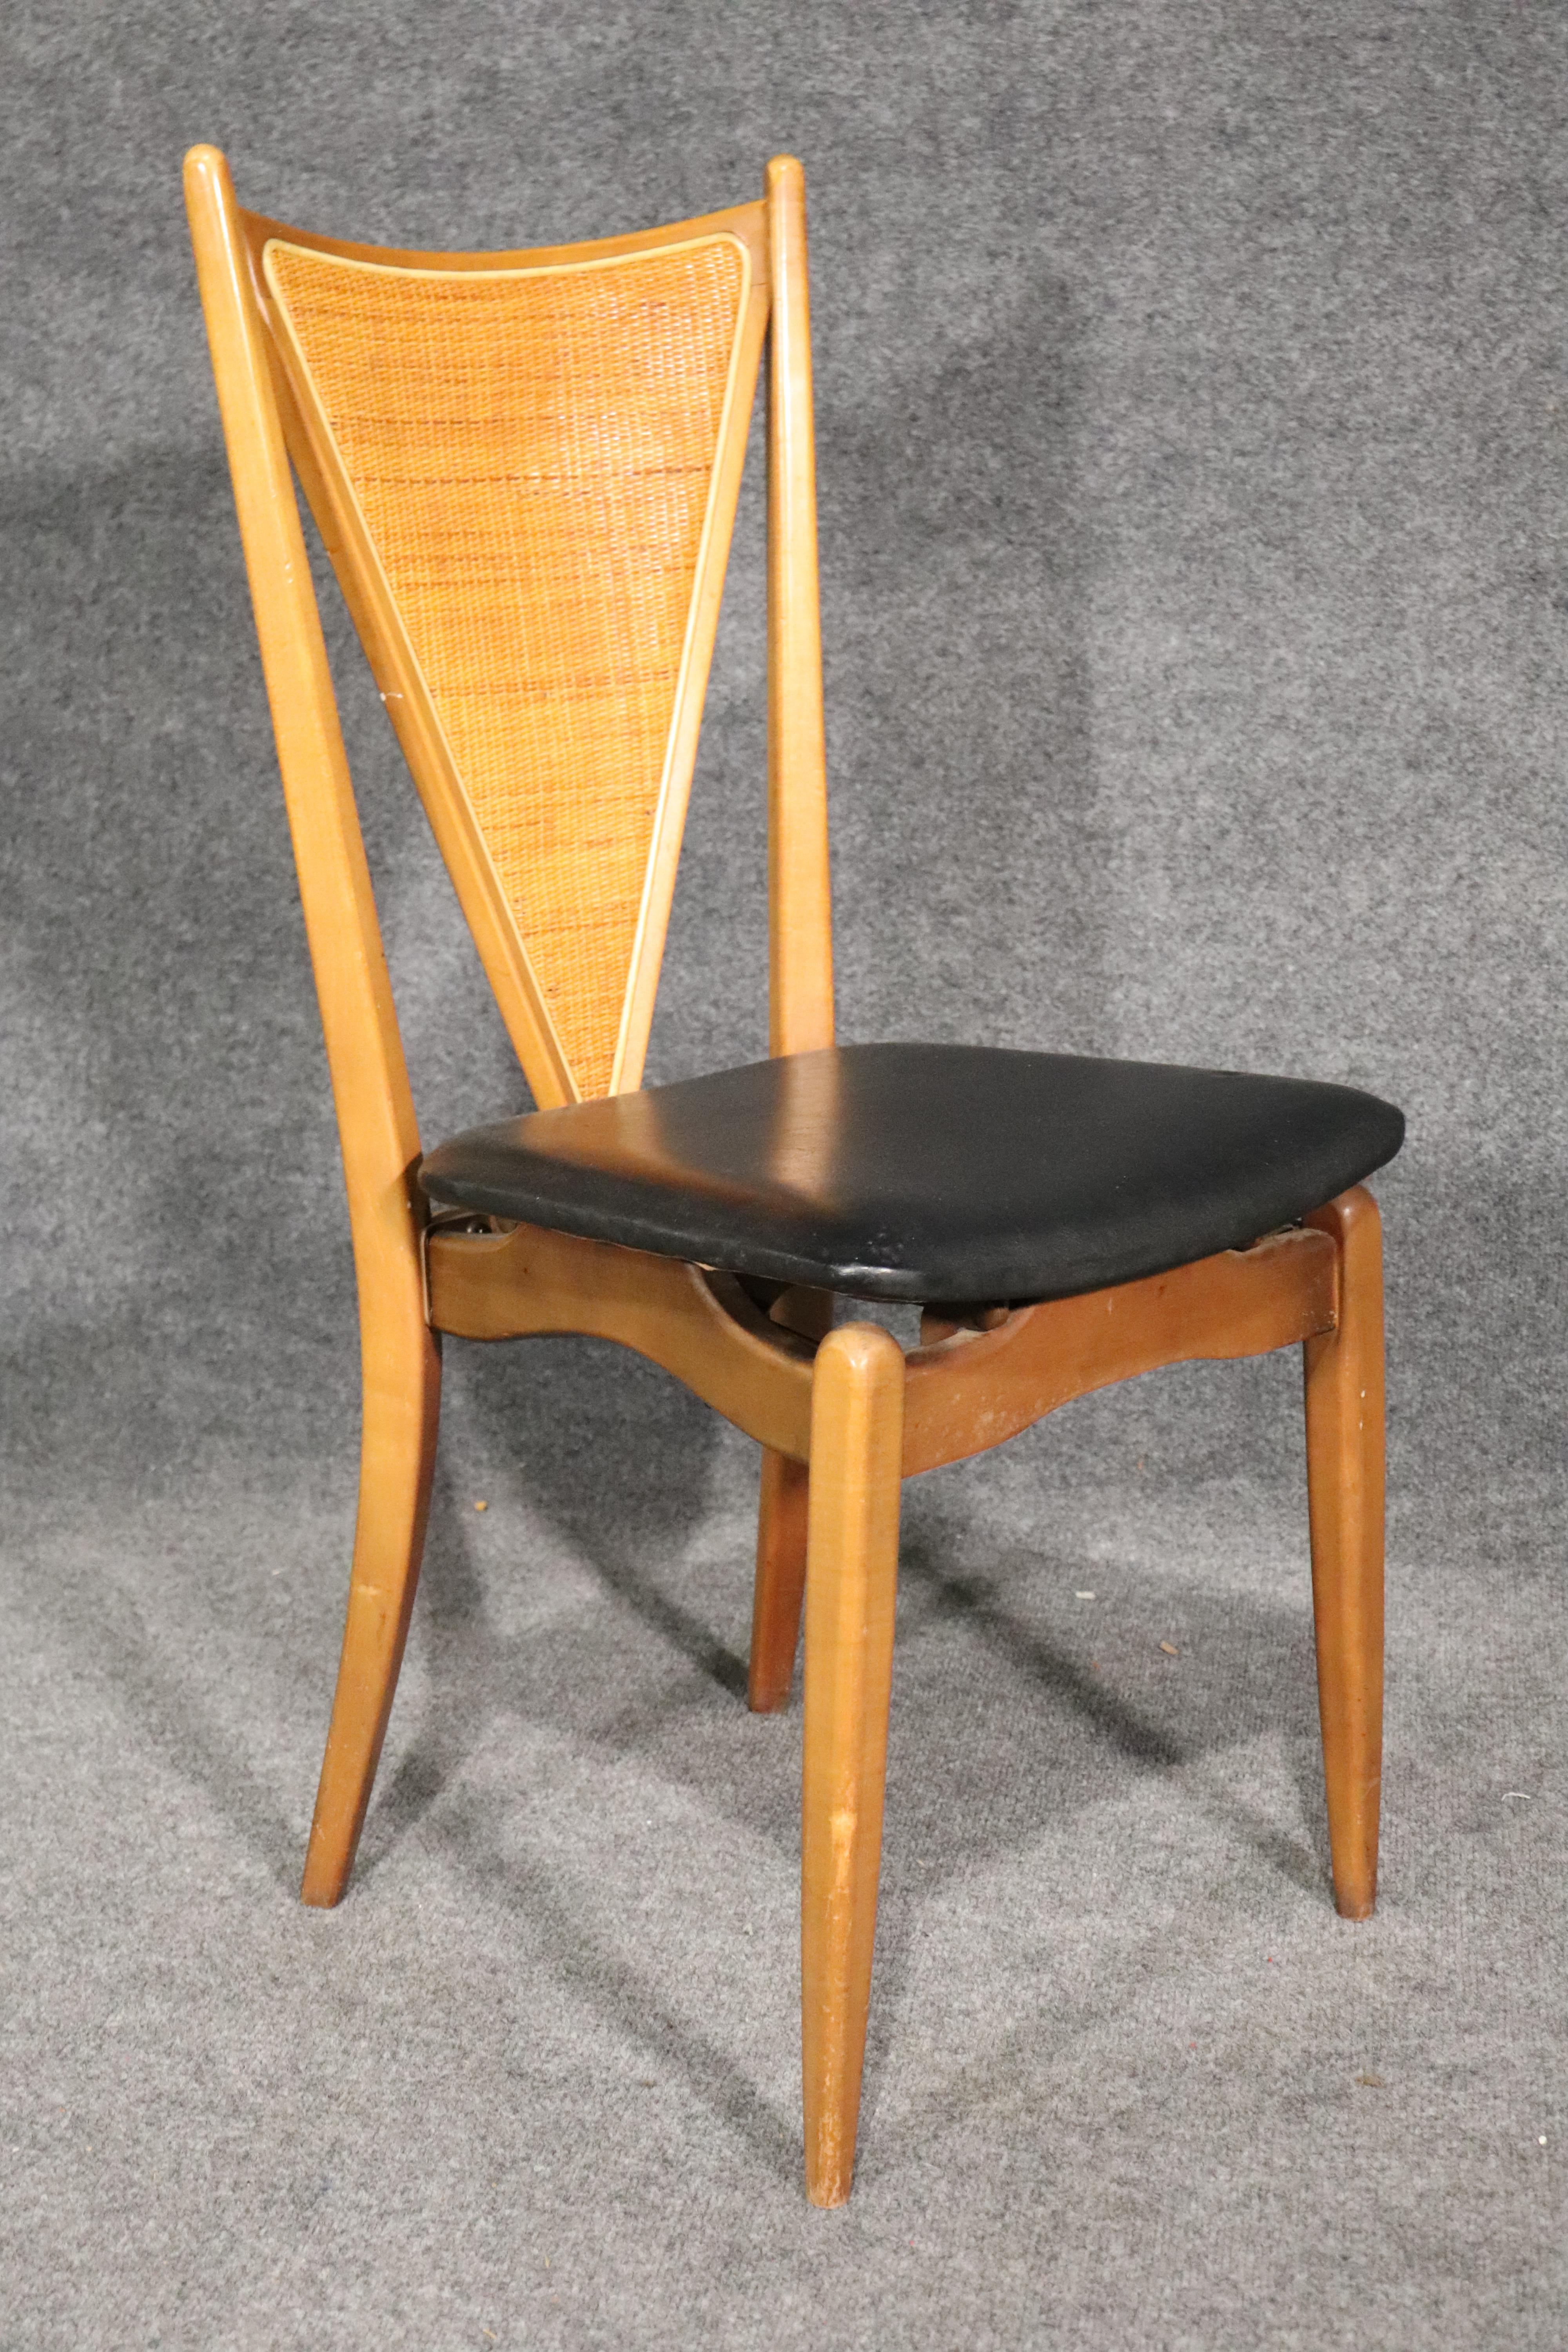 Set of four mid-century dining chairs that fold up for storage. Great V shaped back with woven caning.
Please confirm location.